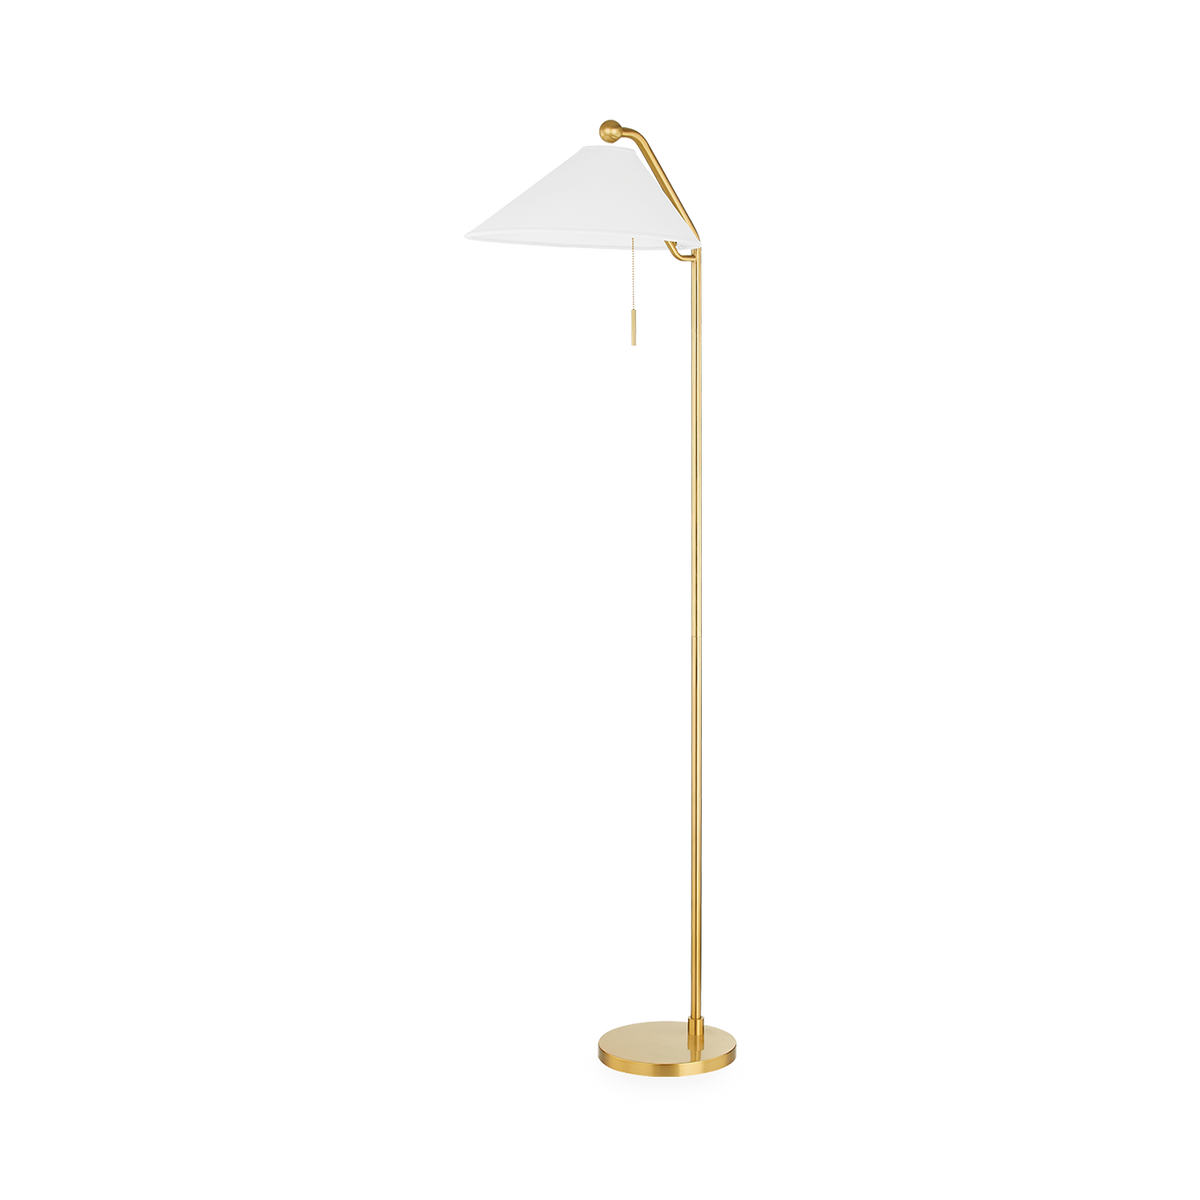 The Aisa Floop Lamp is a classic mid-century styled lamp made modern.